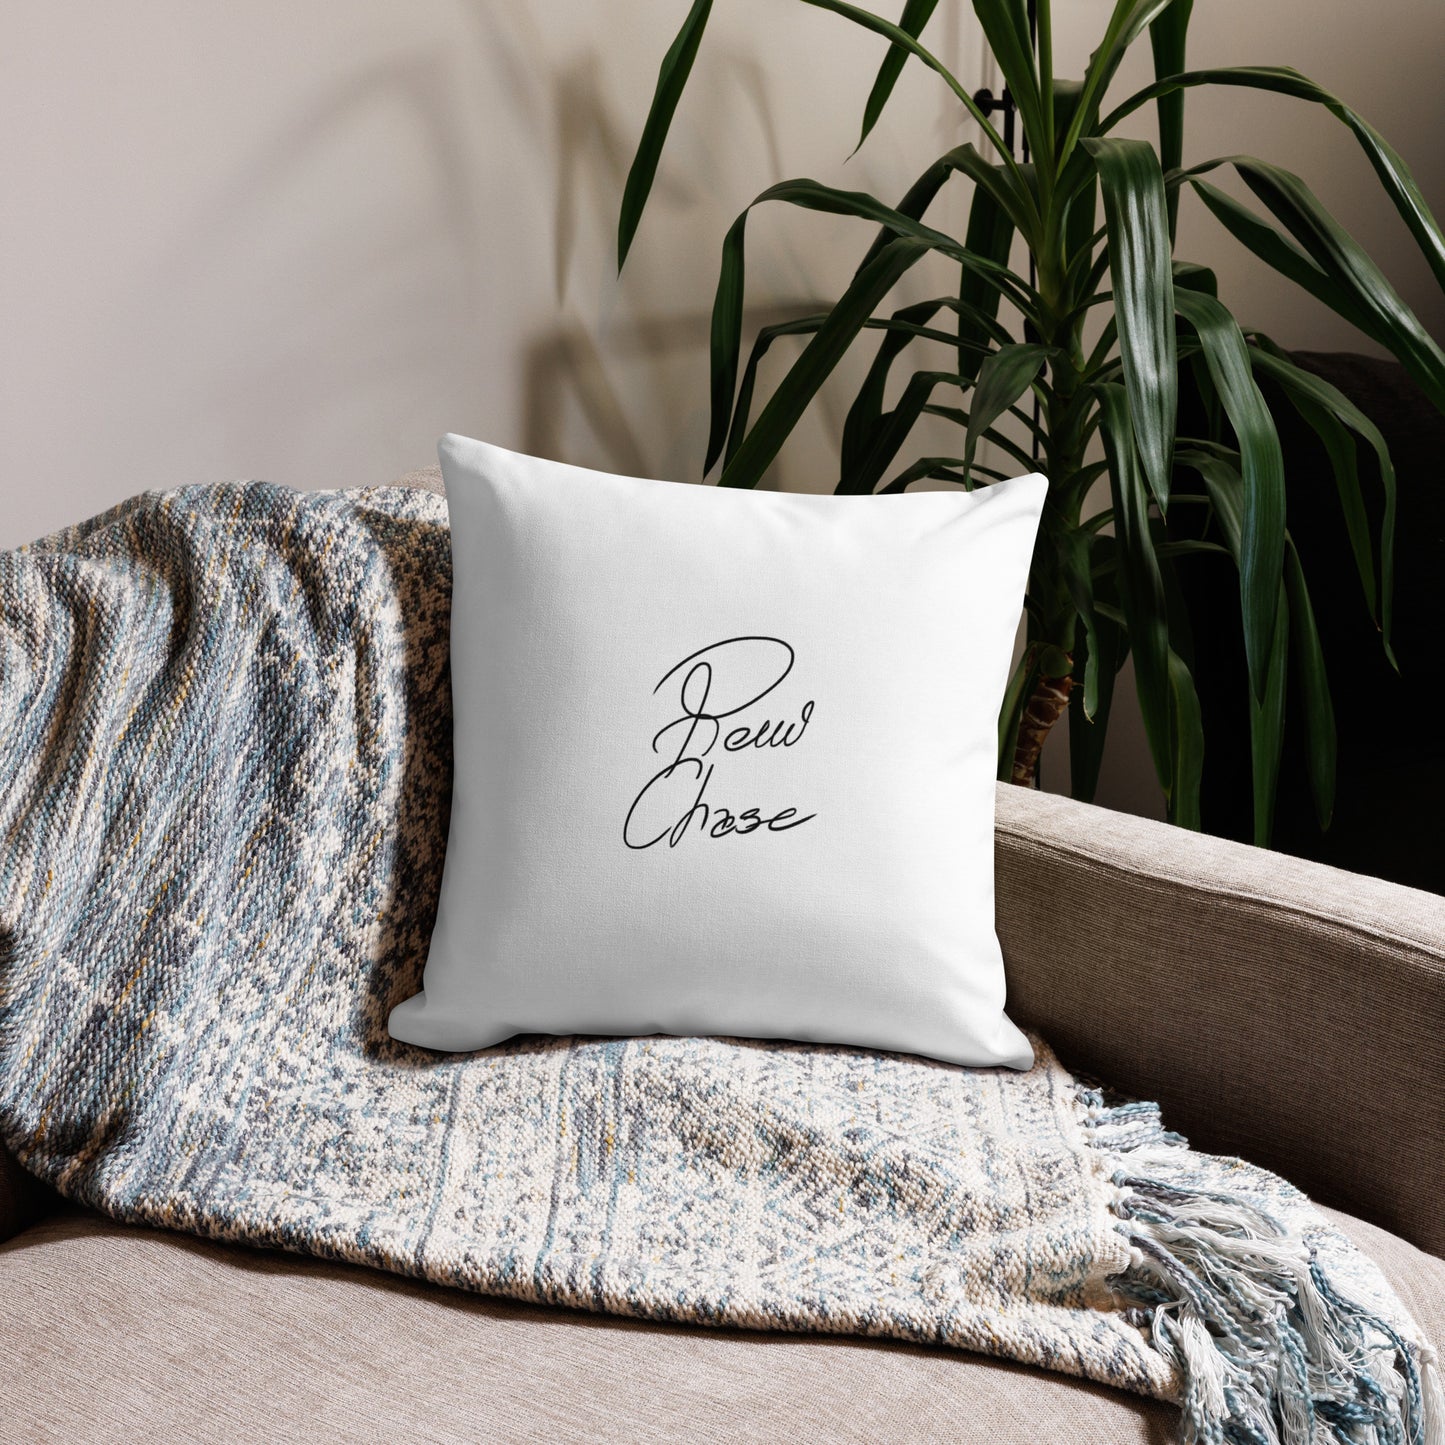 Premium Pillow w/ Inspiring Quote and Signature on back